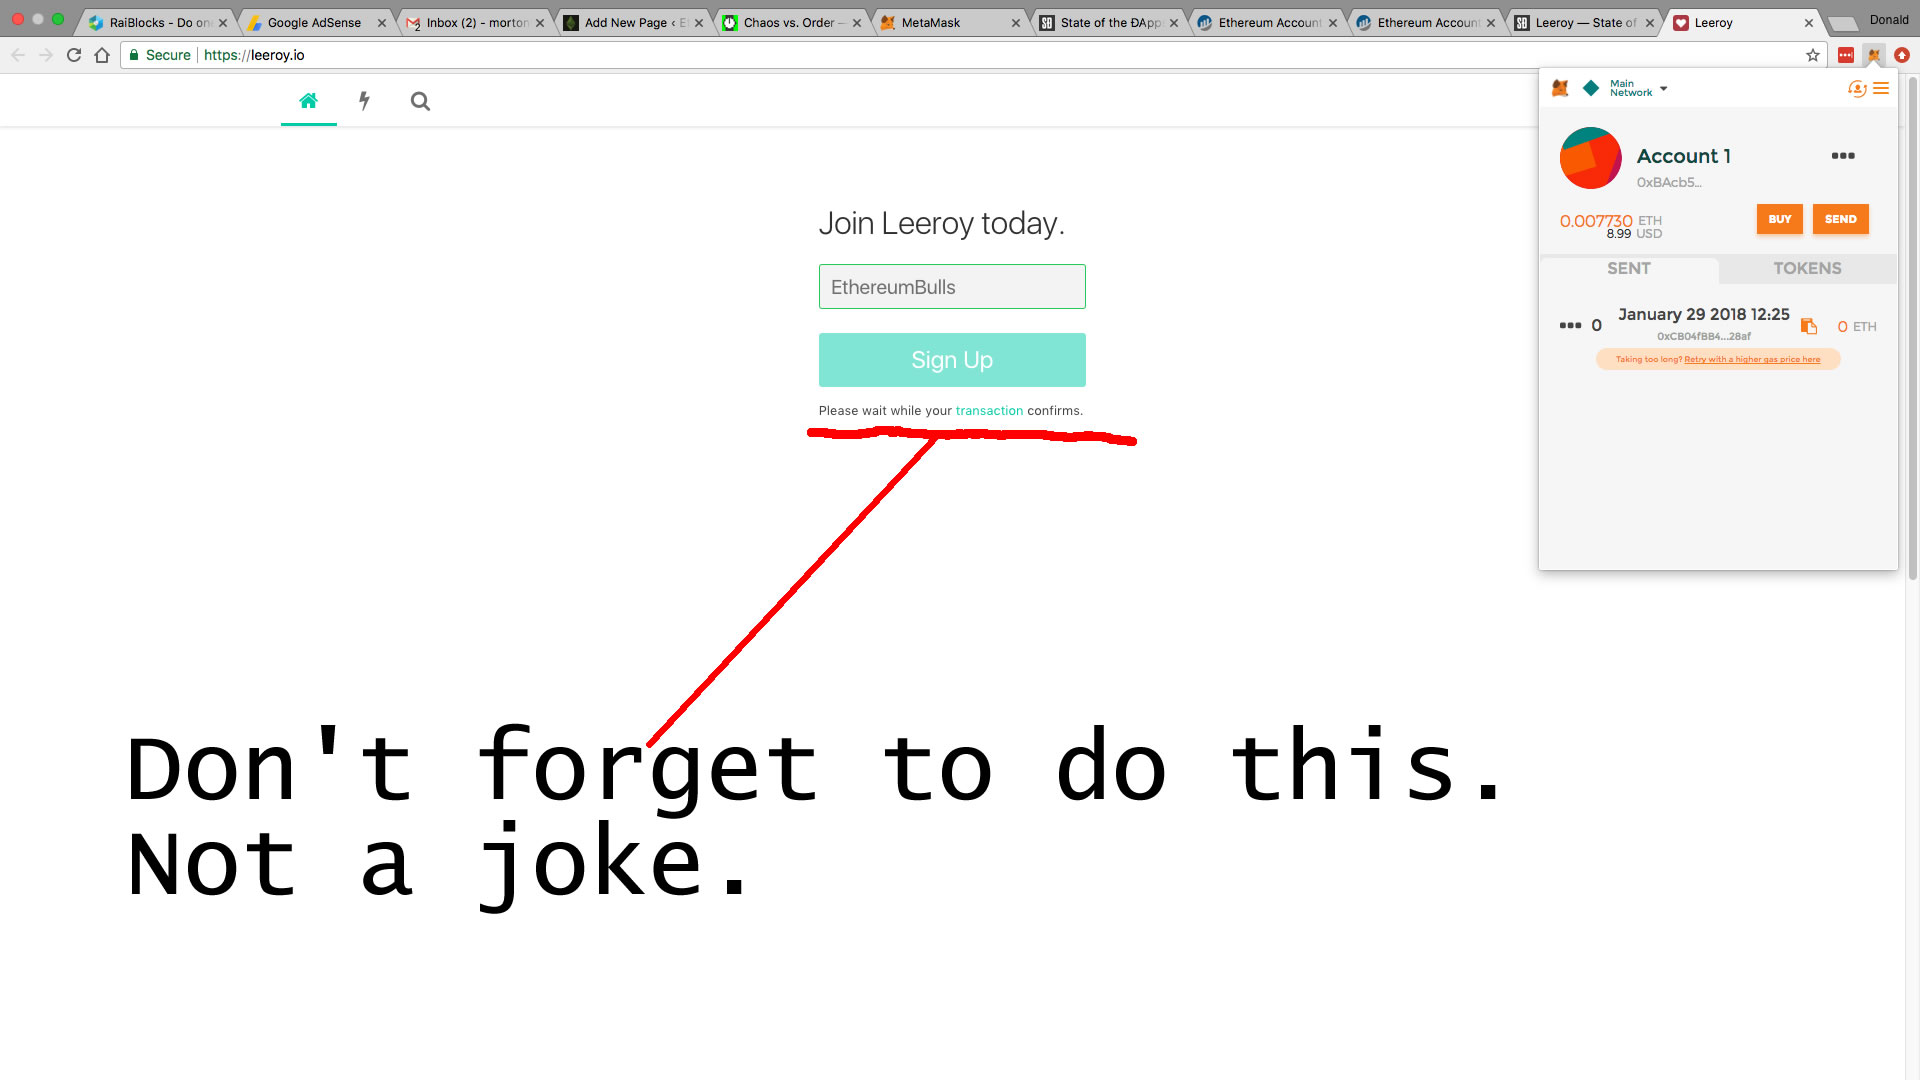 This is an image of the leeroy.io sign up screen. It has a warning that says, wait until your transaction occurs. The author wrote a red line under that statement and drew an arrow to it with the message, Don't forget to do this. It is not a joke. The implication is that you actually have to wait a non-trivial amount of time until your account exists on the blockchain.